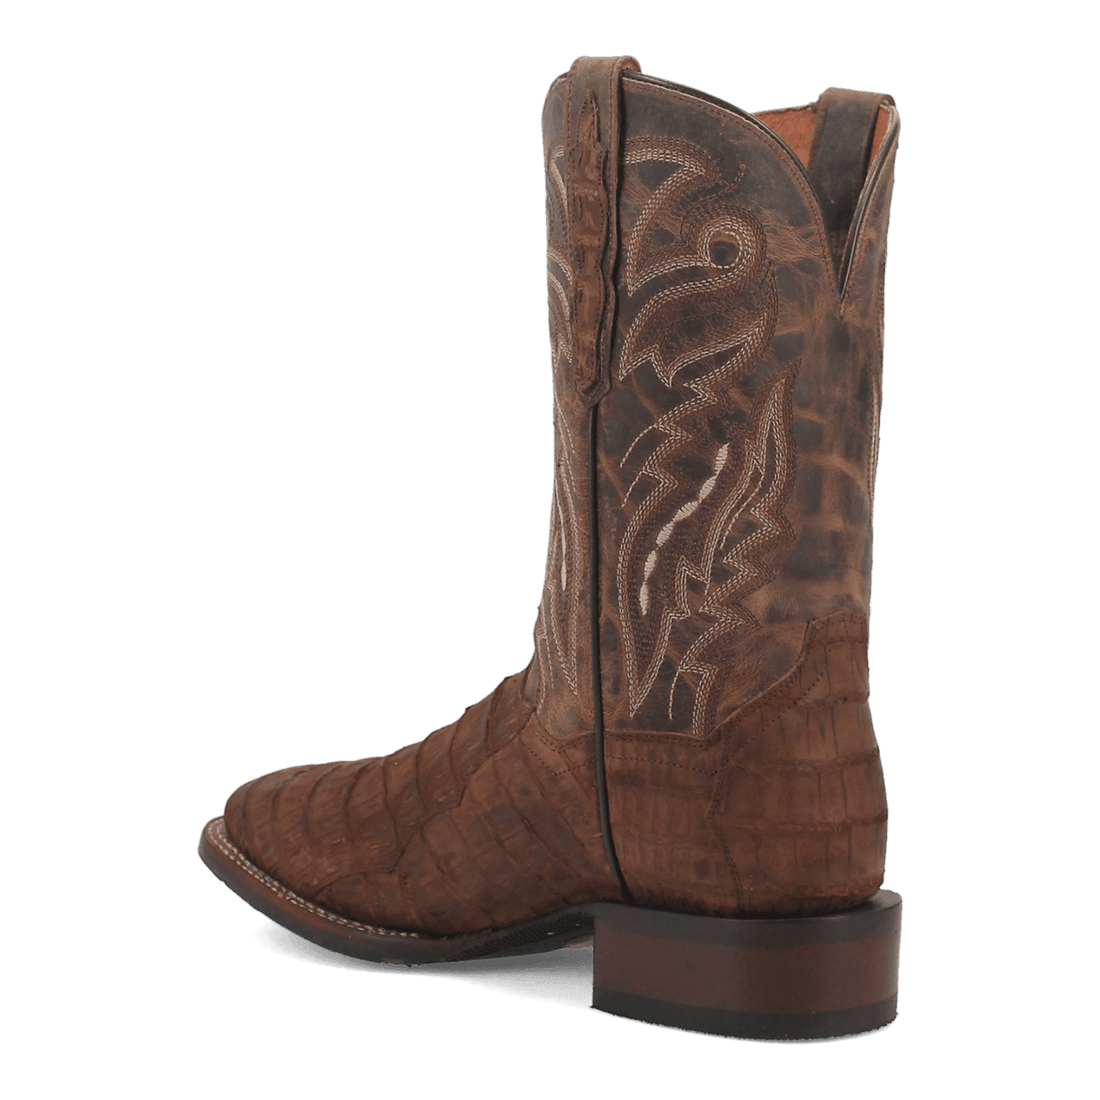 MICKEY CAIMAN BOOT Preview #16